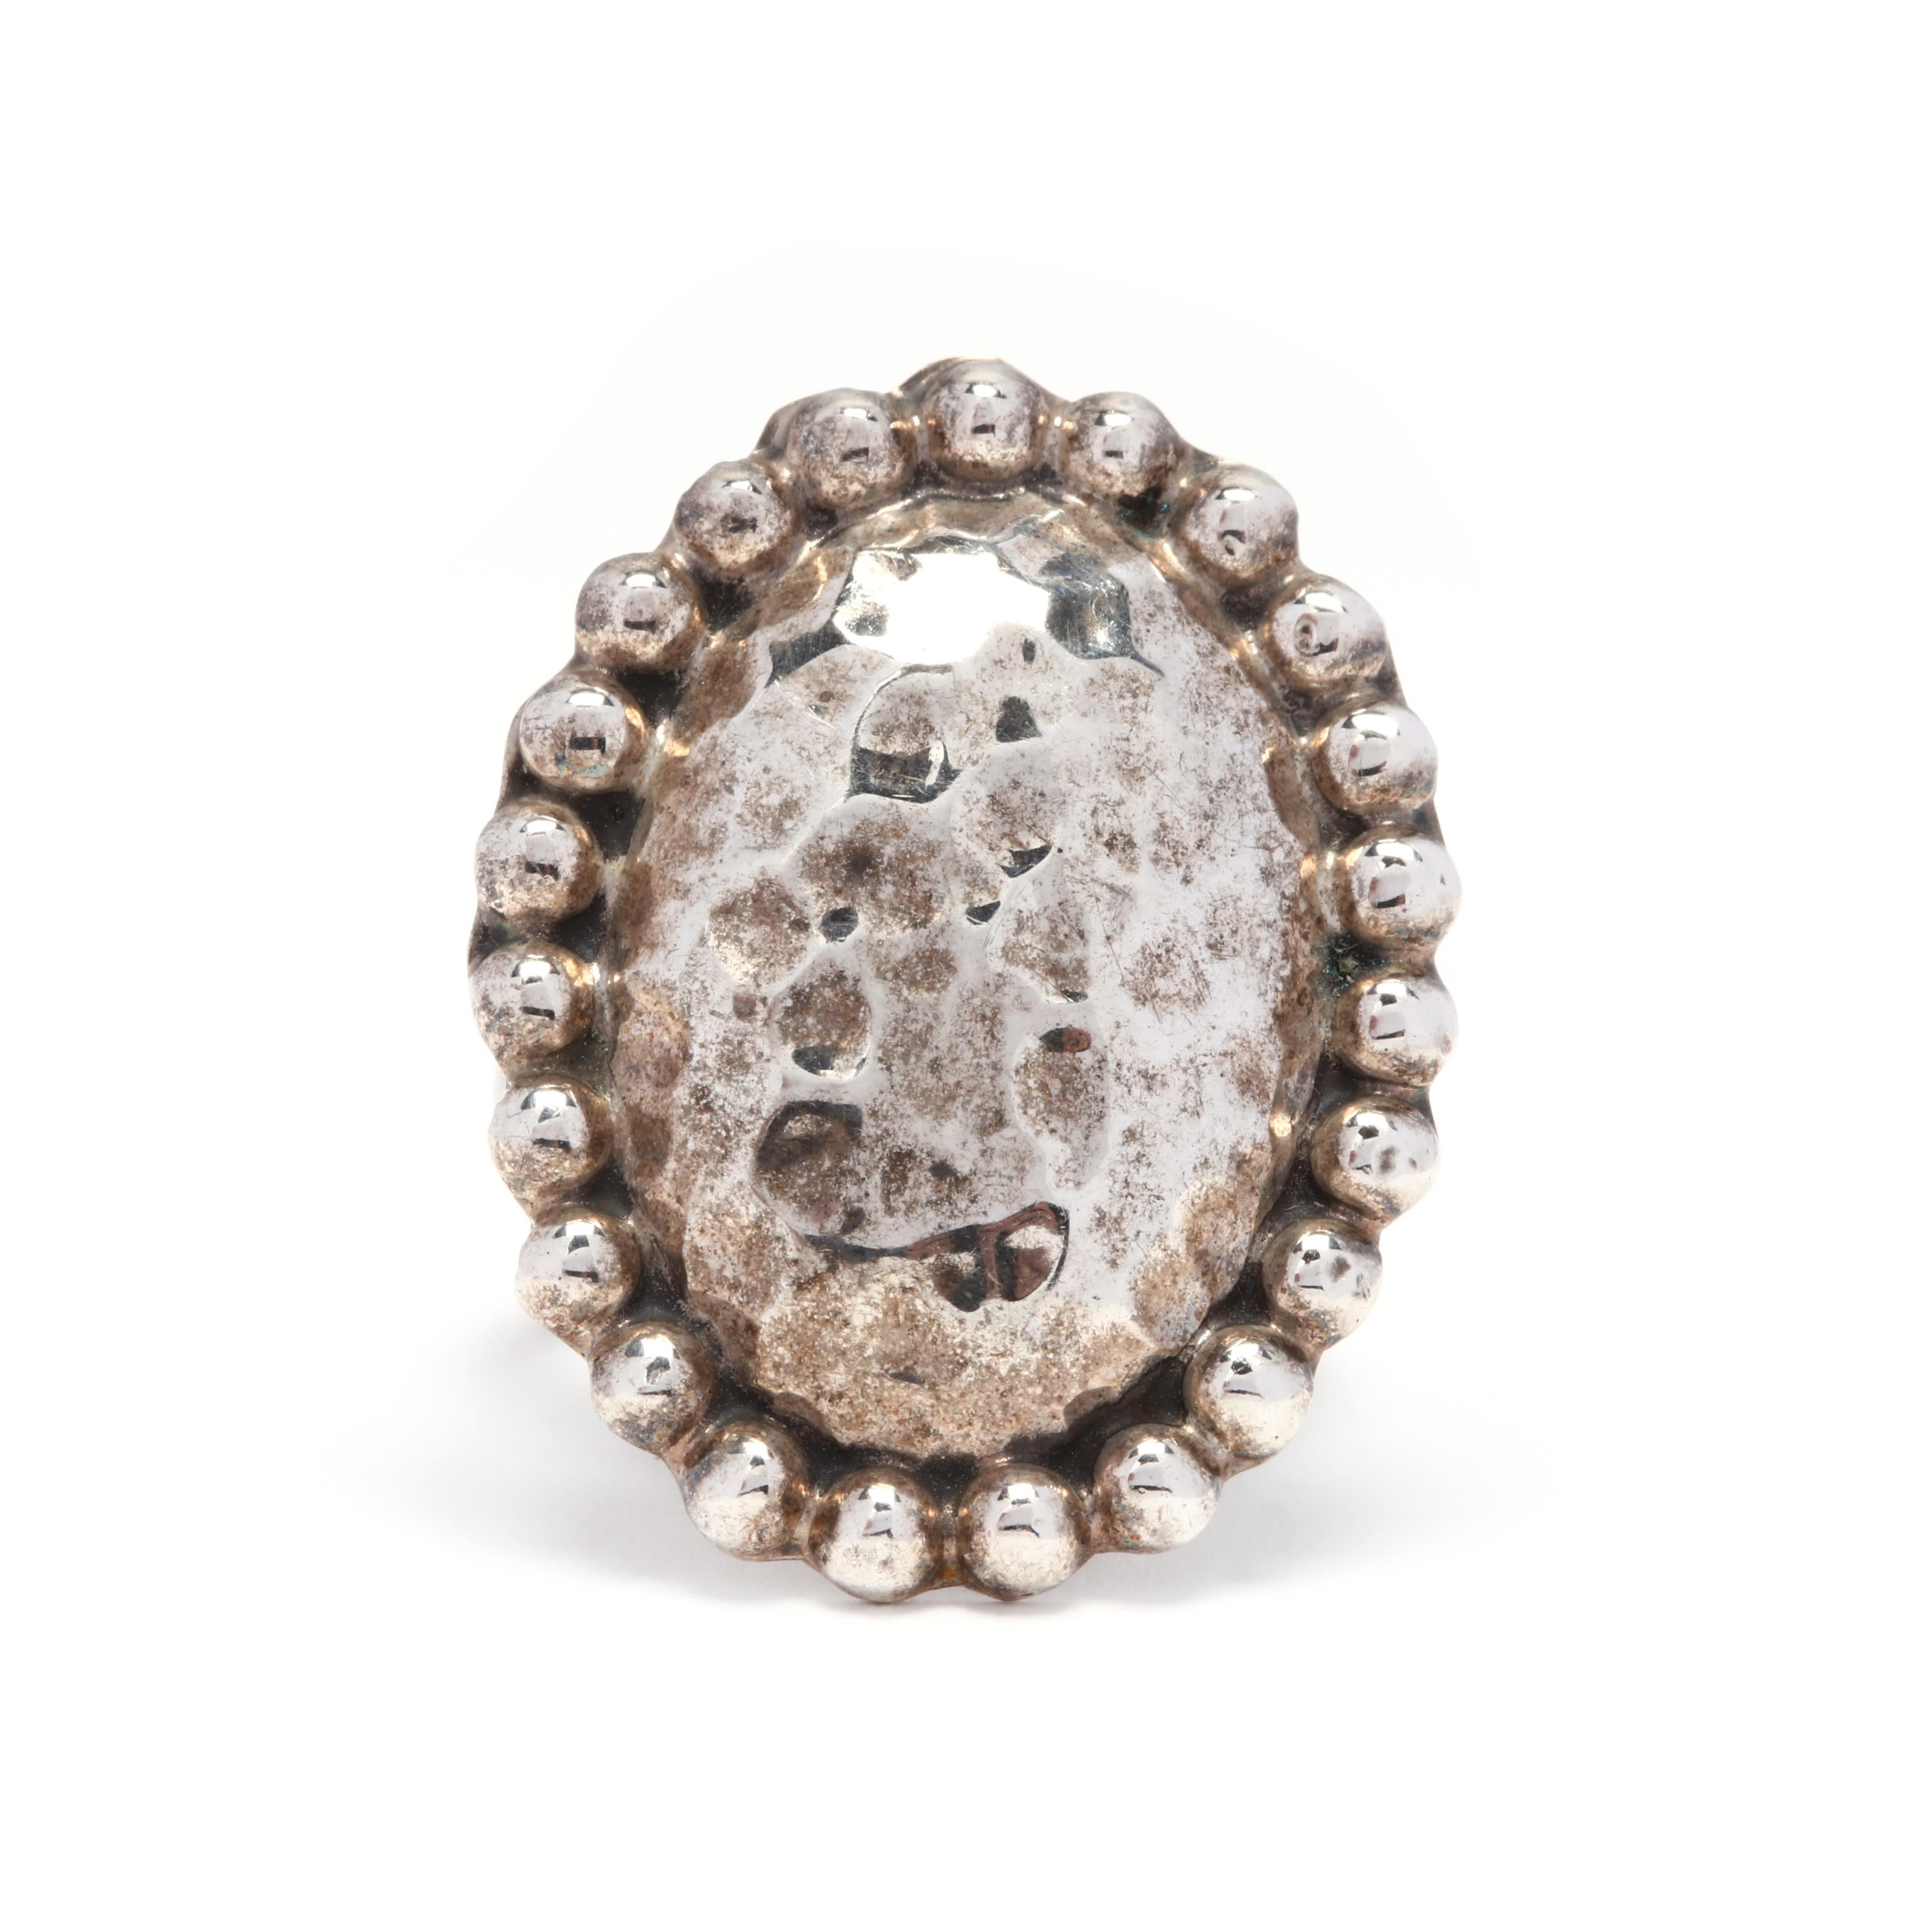 A sterling silver hammered oval statement ring. This ring features a large, hammered dome oval surrounded by a beaded halo and with a polished shank.

Ring Size 6

Length: 1 1/8 in.

Width: 7/8 in.

8.12 grams

* Please note that this is a vintage